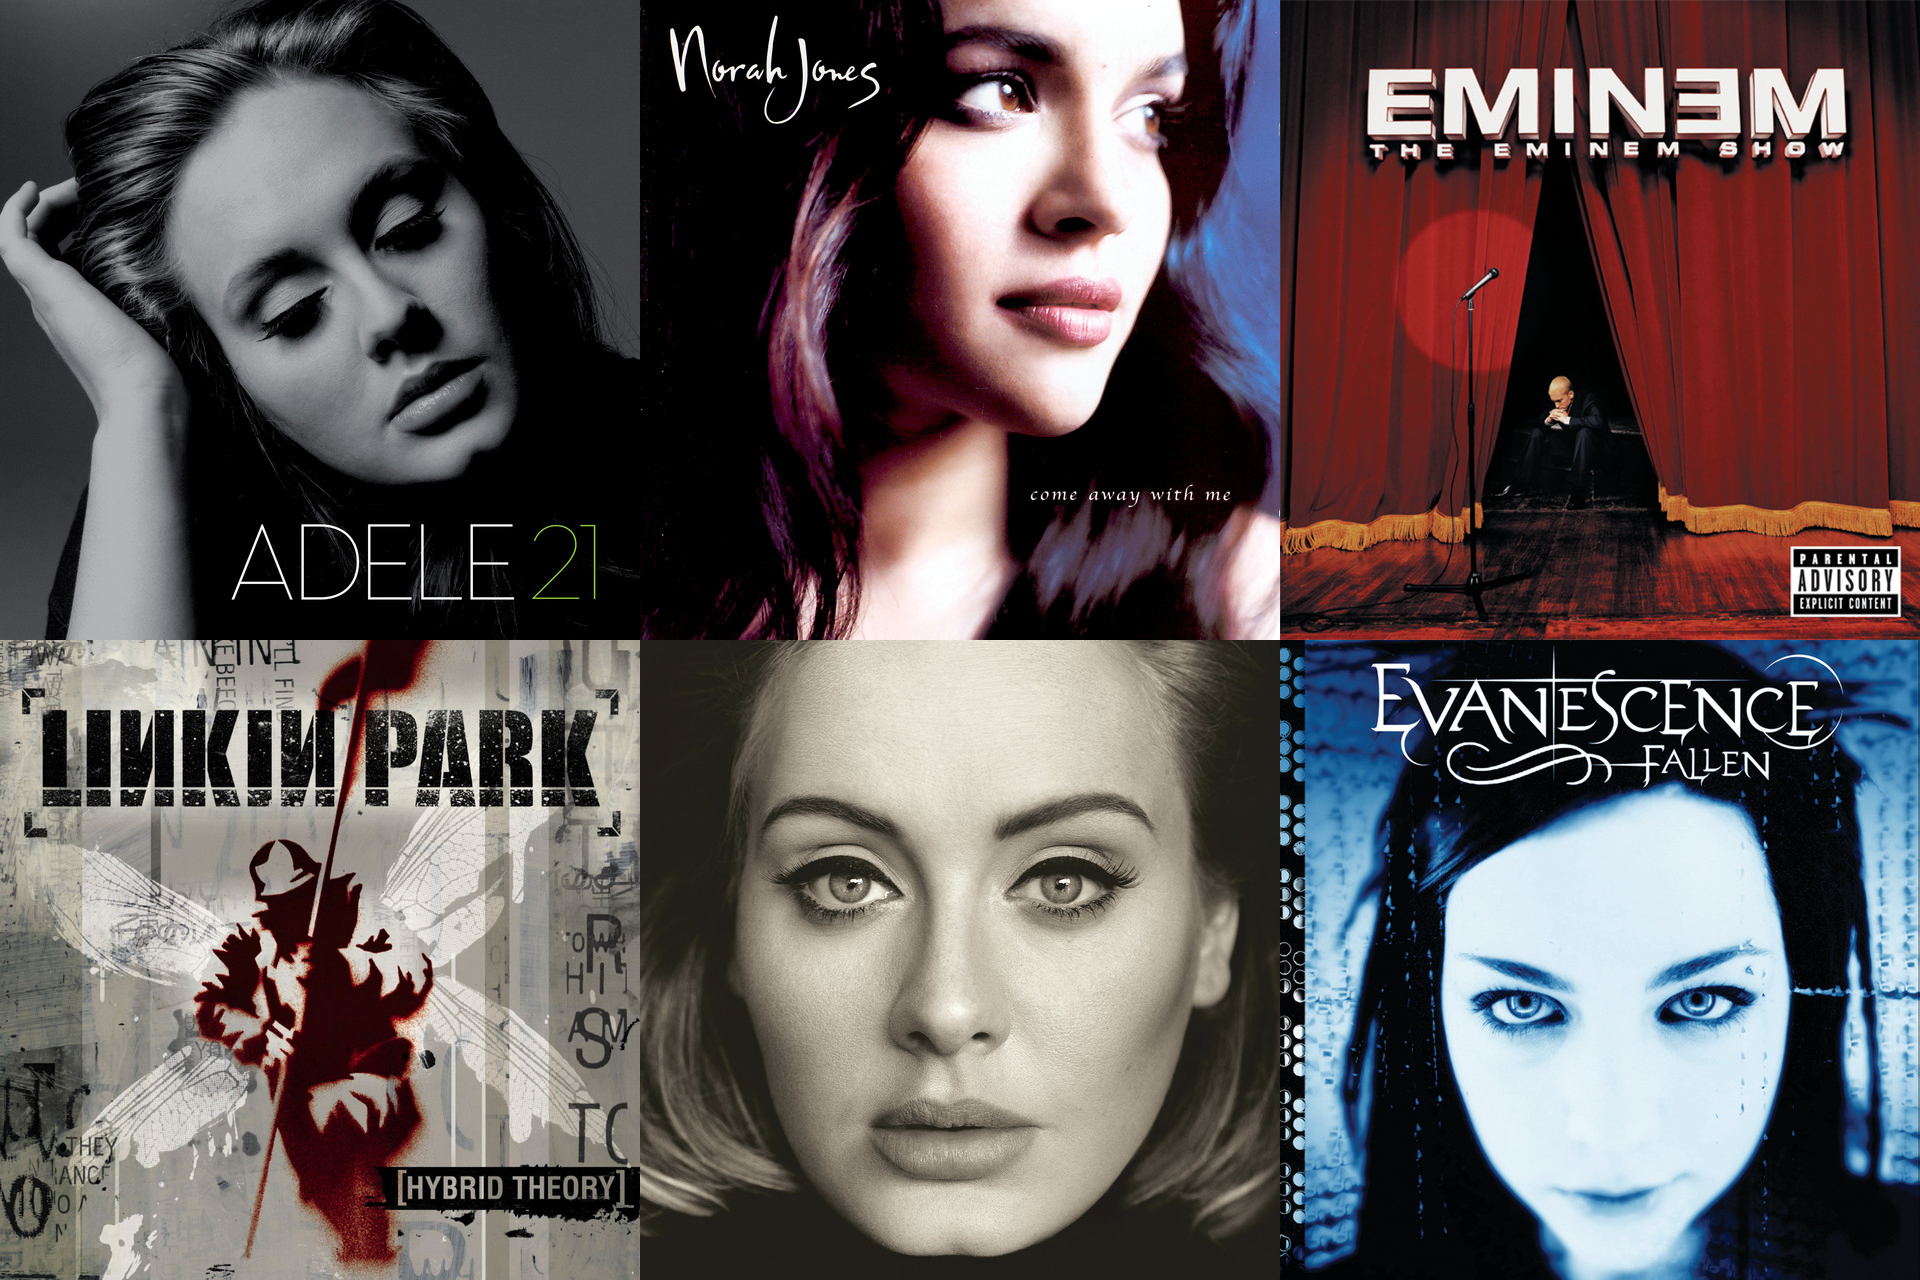 Top 13 best-selling albums of the 21st century